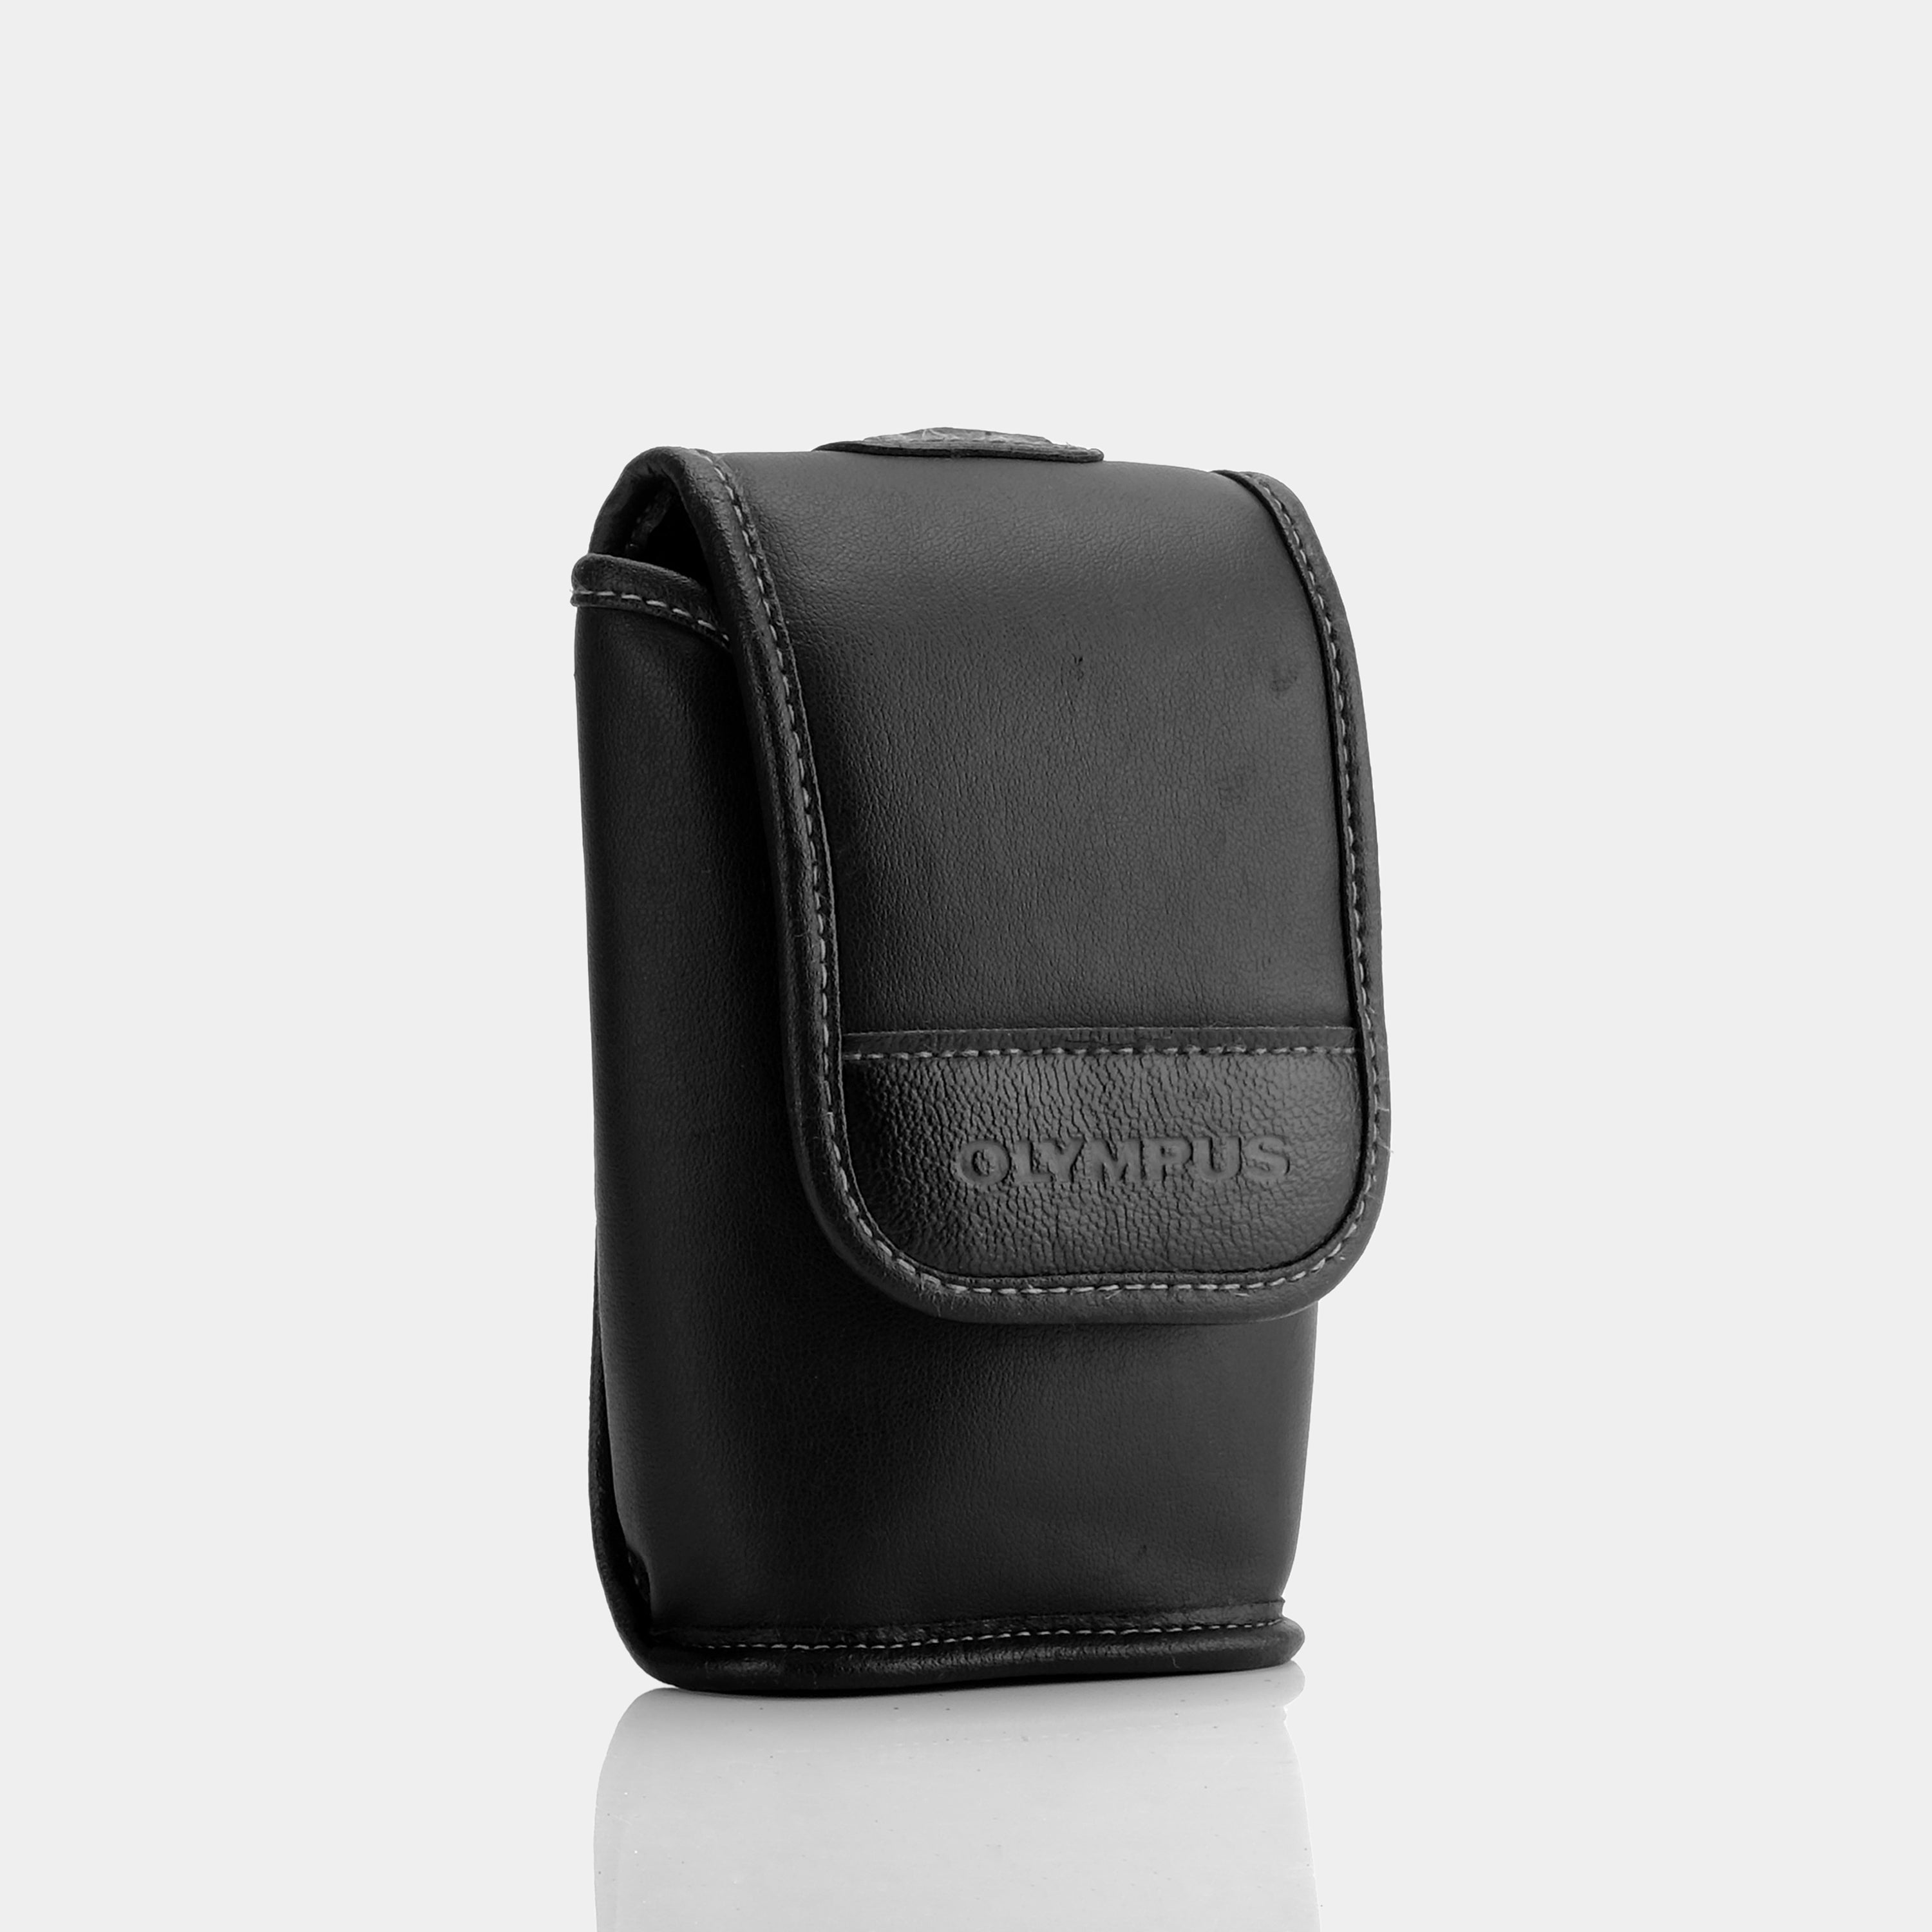 Olympus Faux Leather Point And Shoot Camera Case